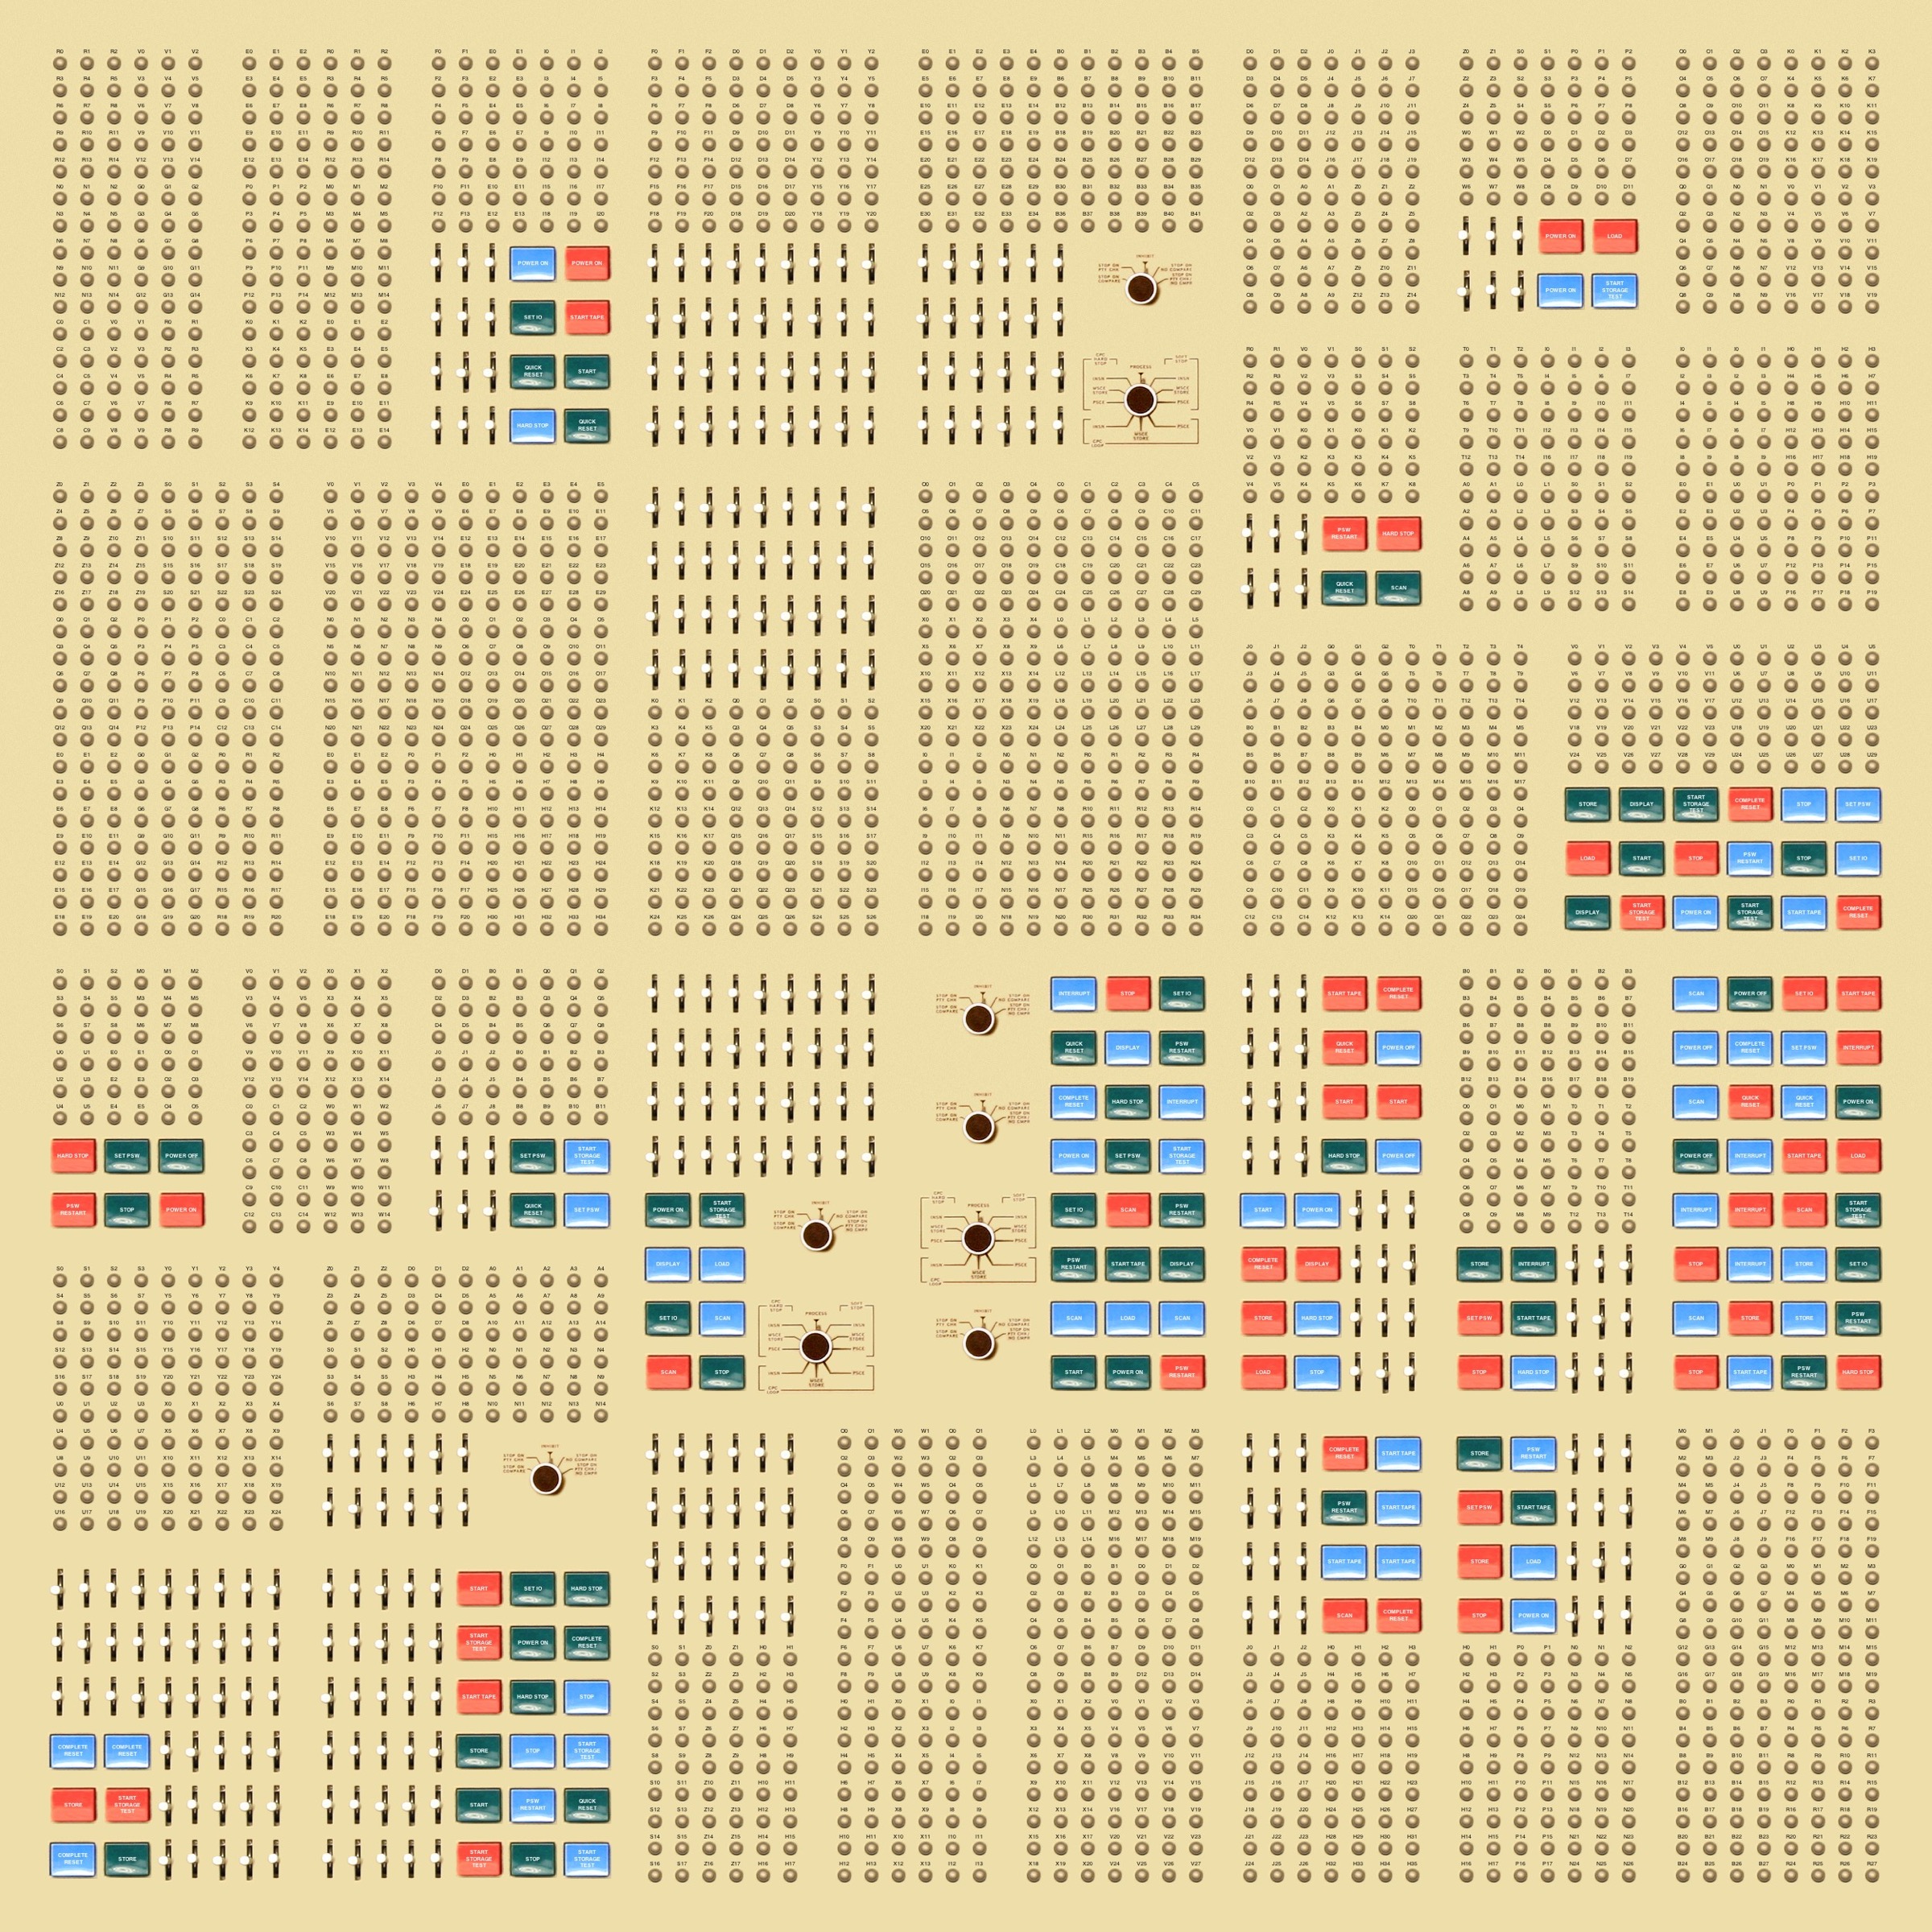 Buttons, levers, and knobs from computers of the 1960s arranged in a randomly generated grid.